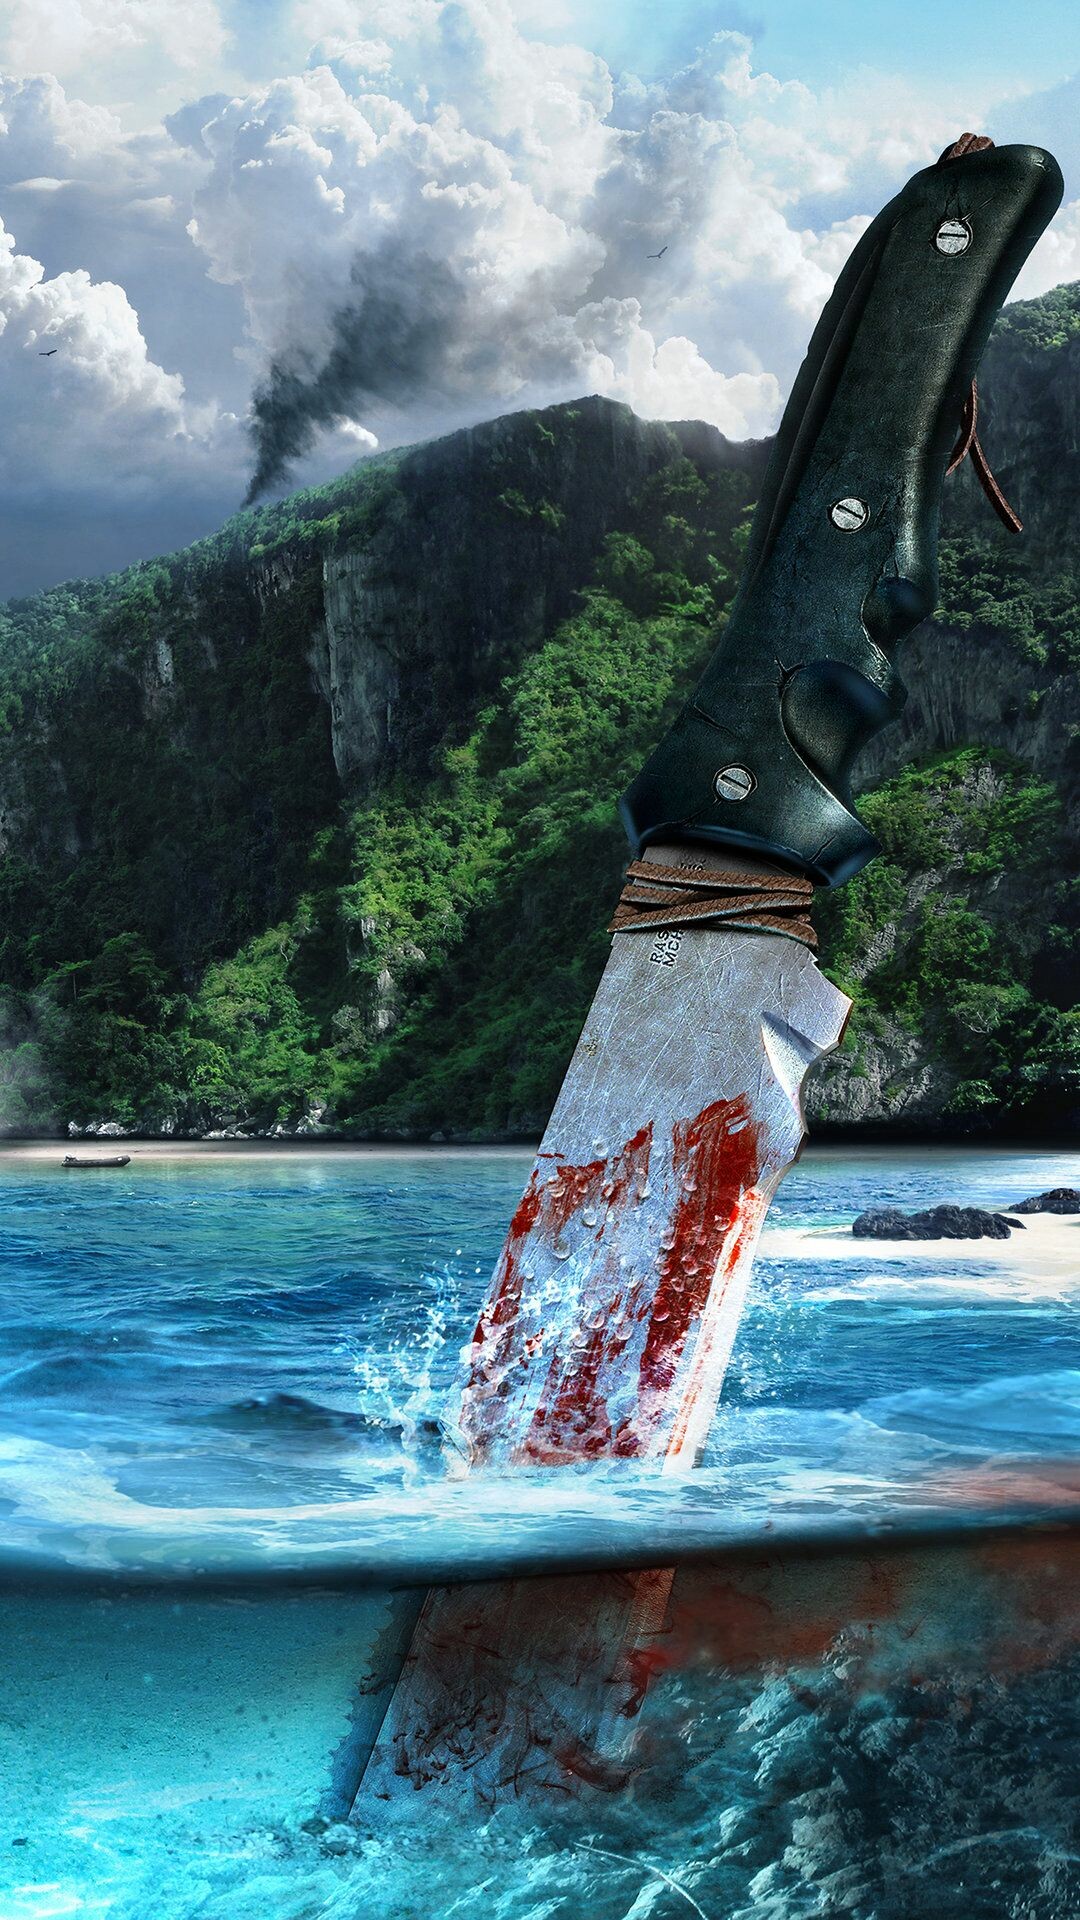 Far Cry 3: The players must battle the pirates and manage to escape from the island and its hostile inhabitants. 1080x1920 Full HD Wallpaper.